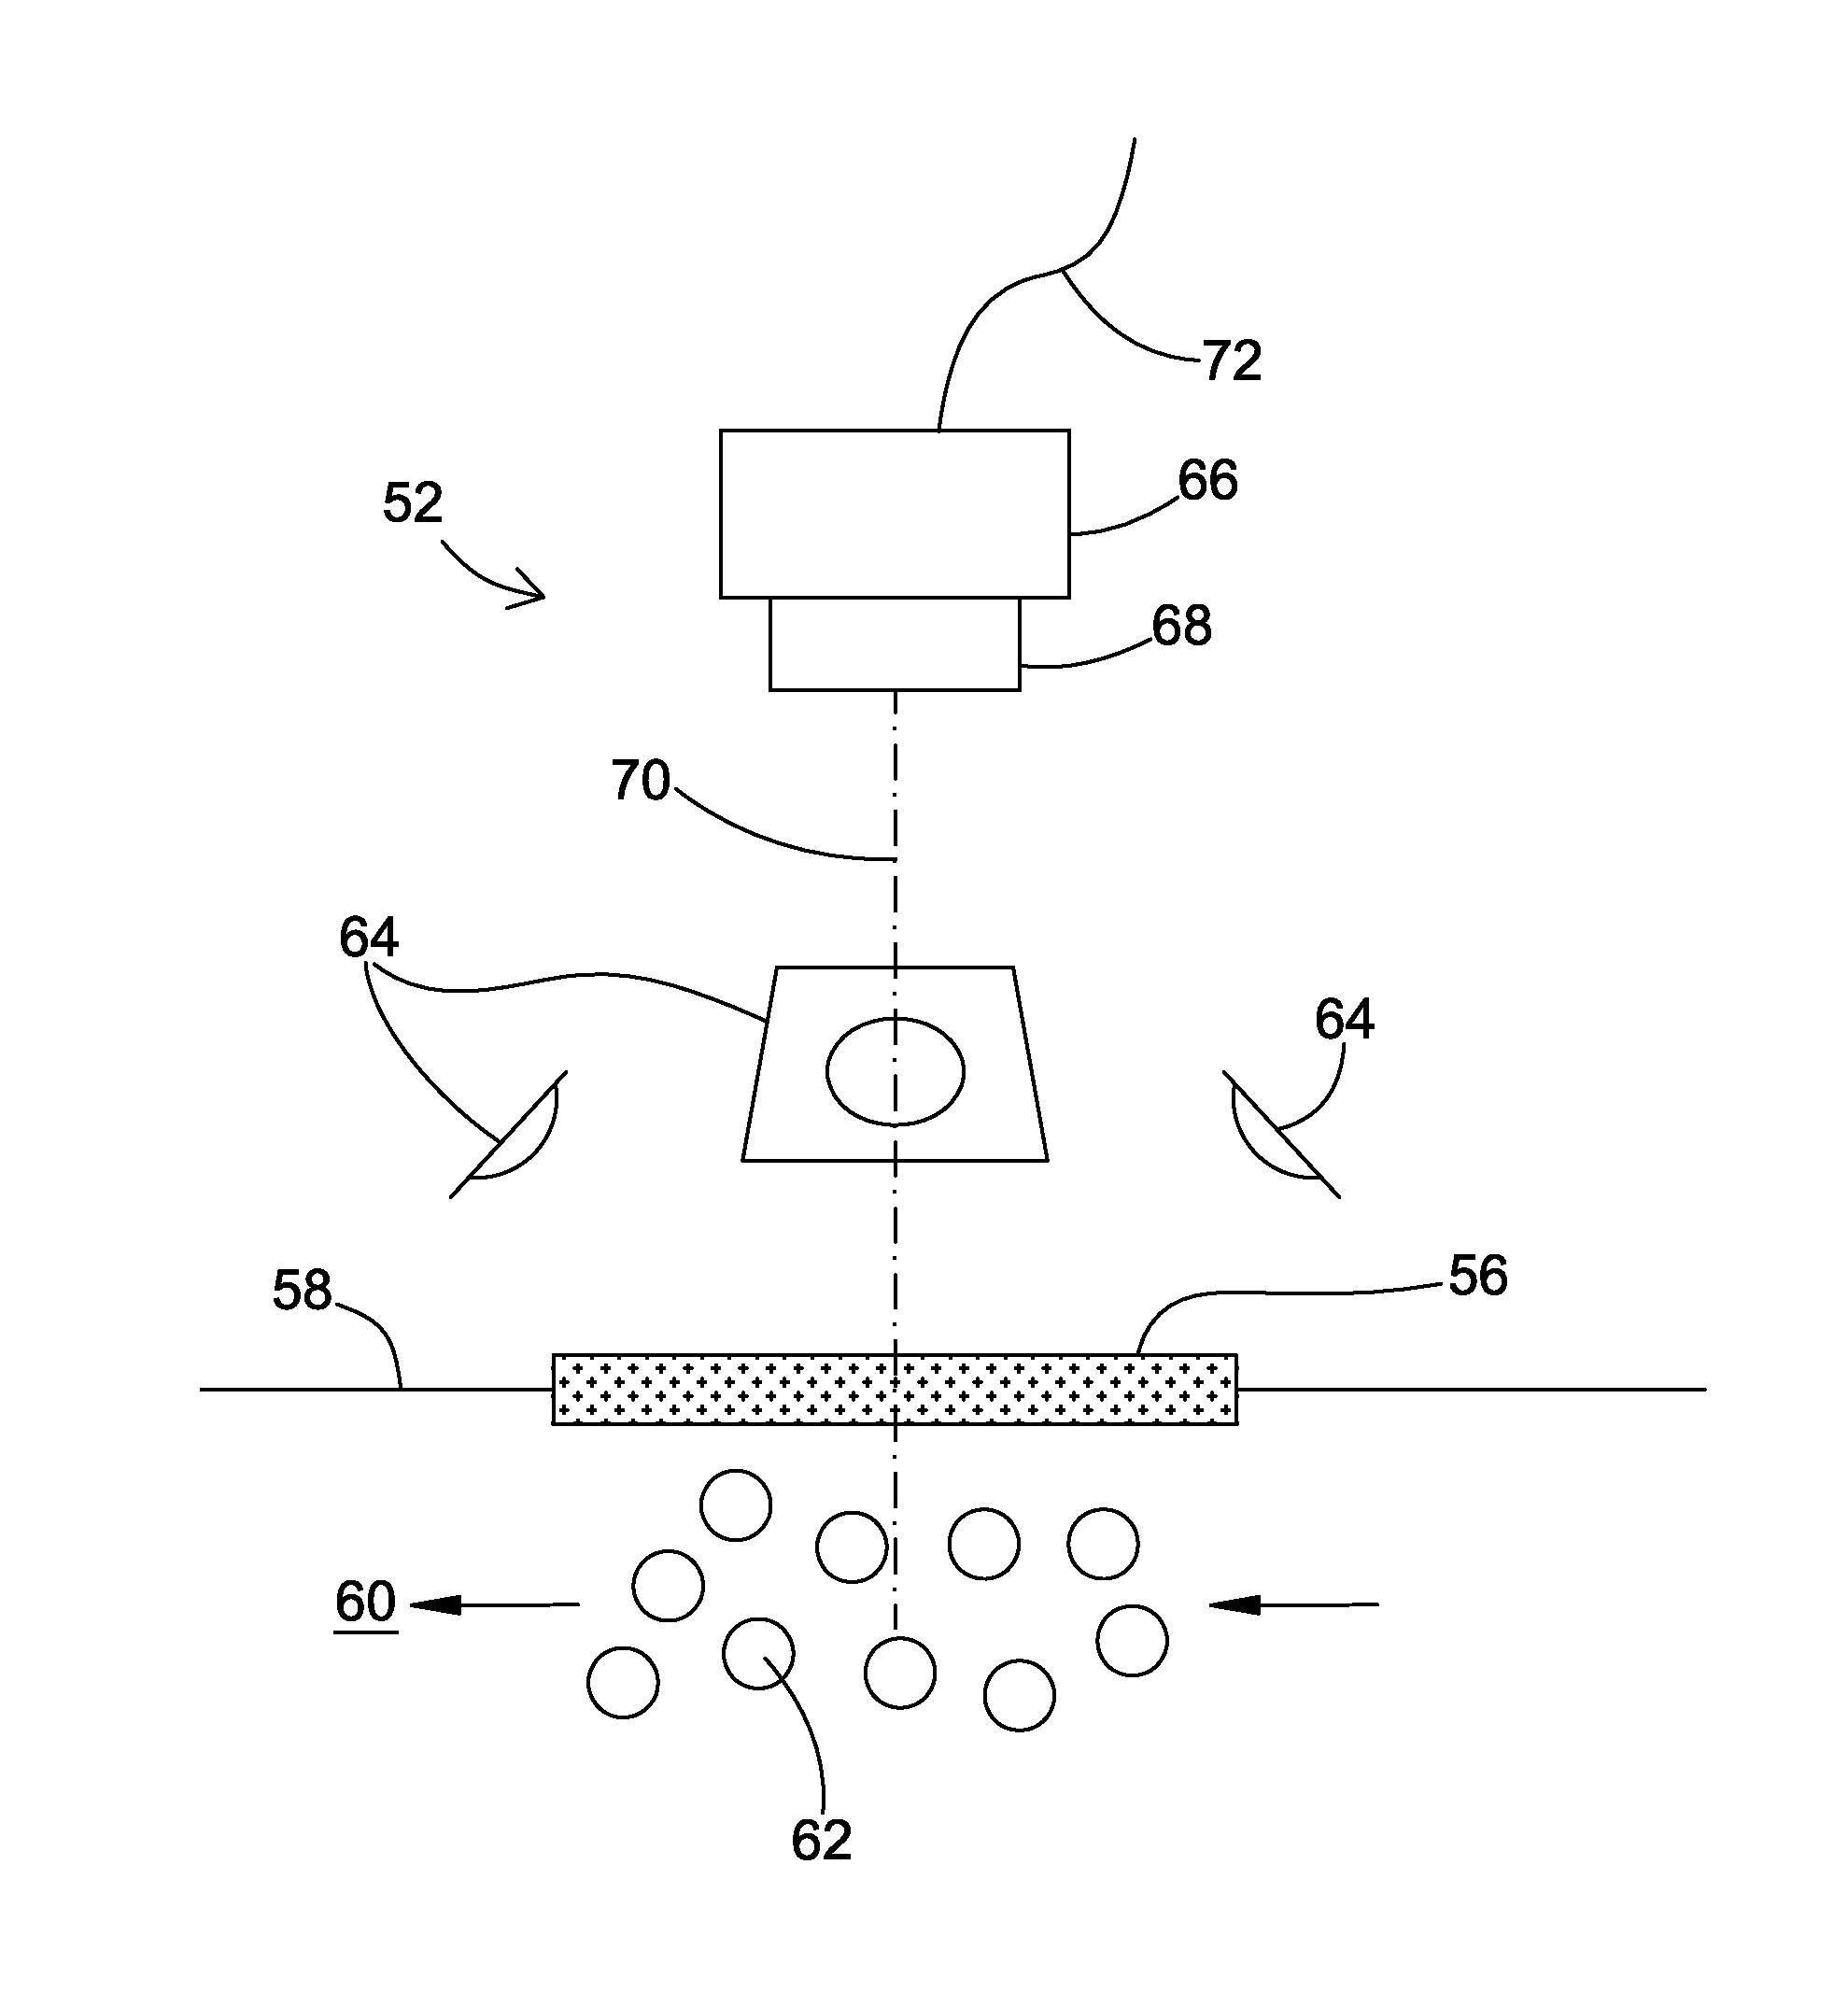 Method And Arrangement For The Optical Evaluation Of Harvested Crop In A Harvesting Machine